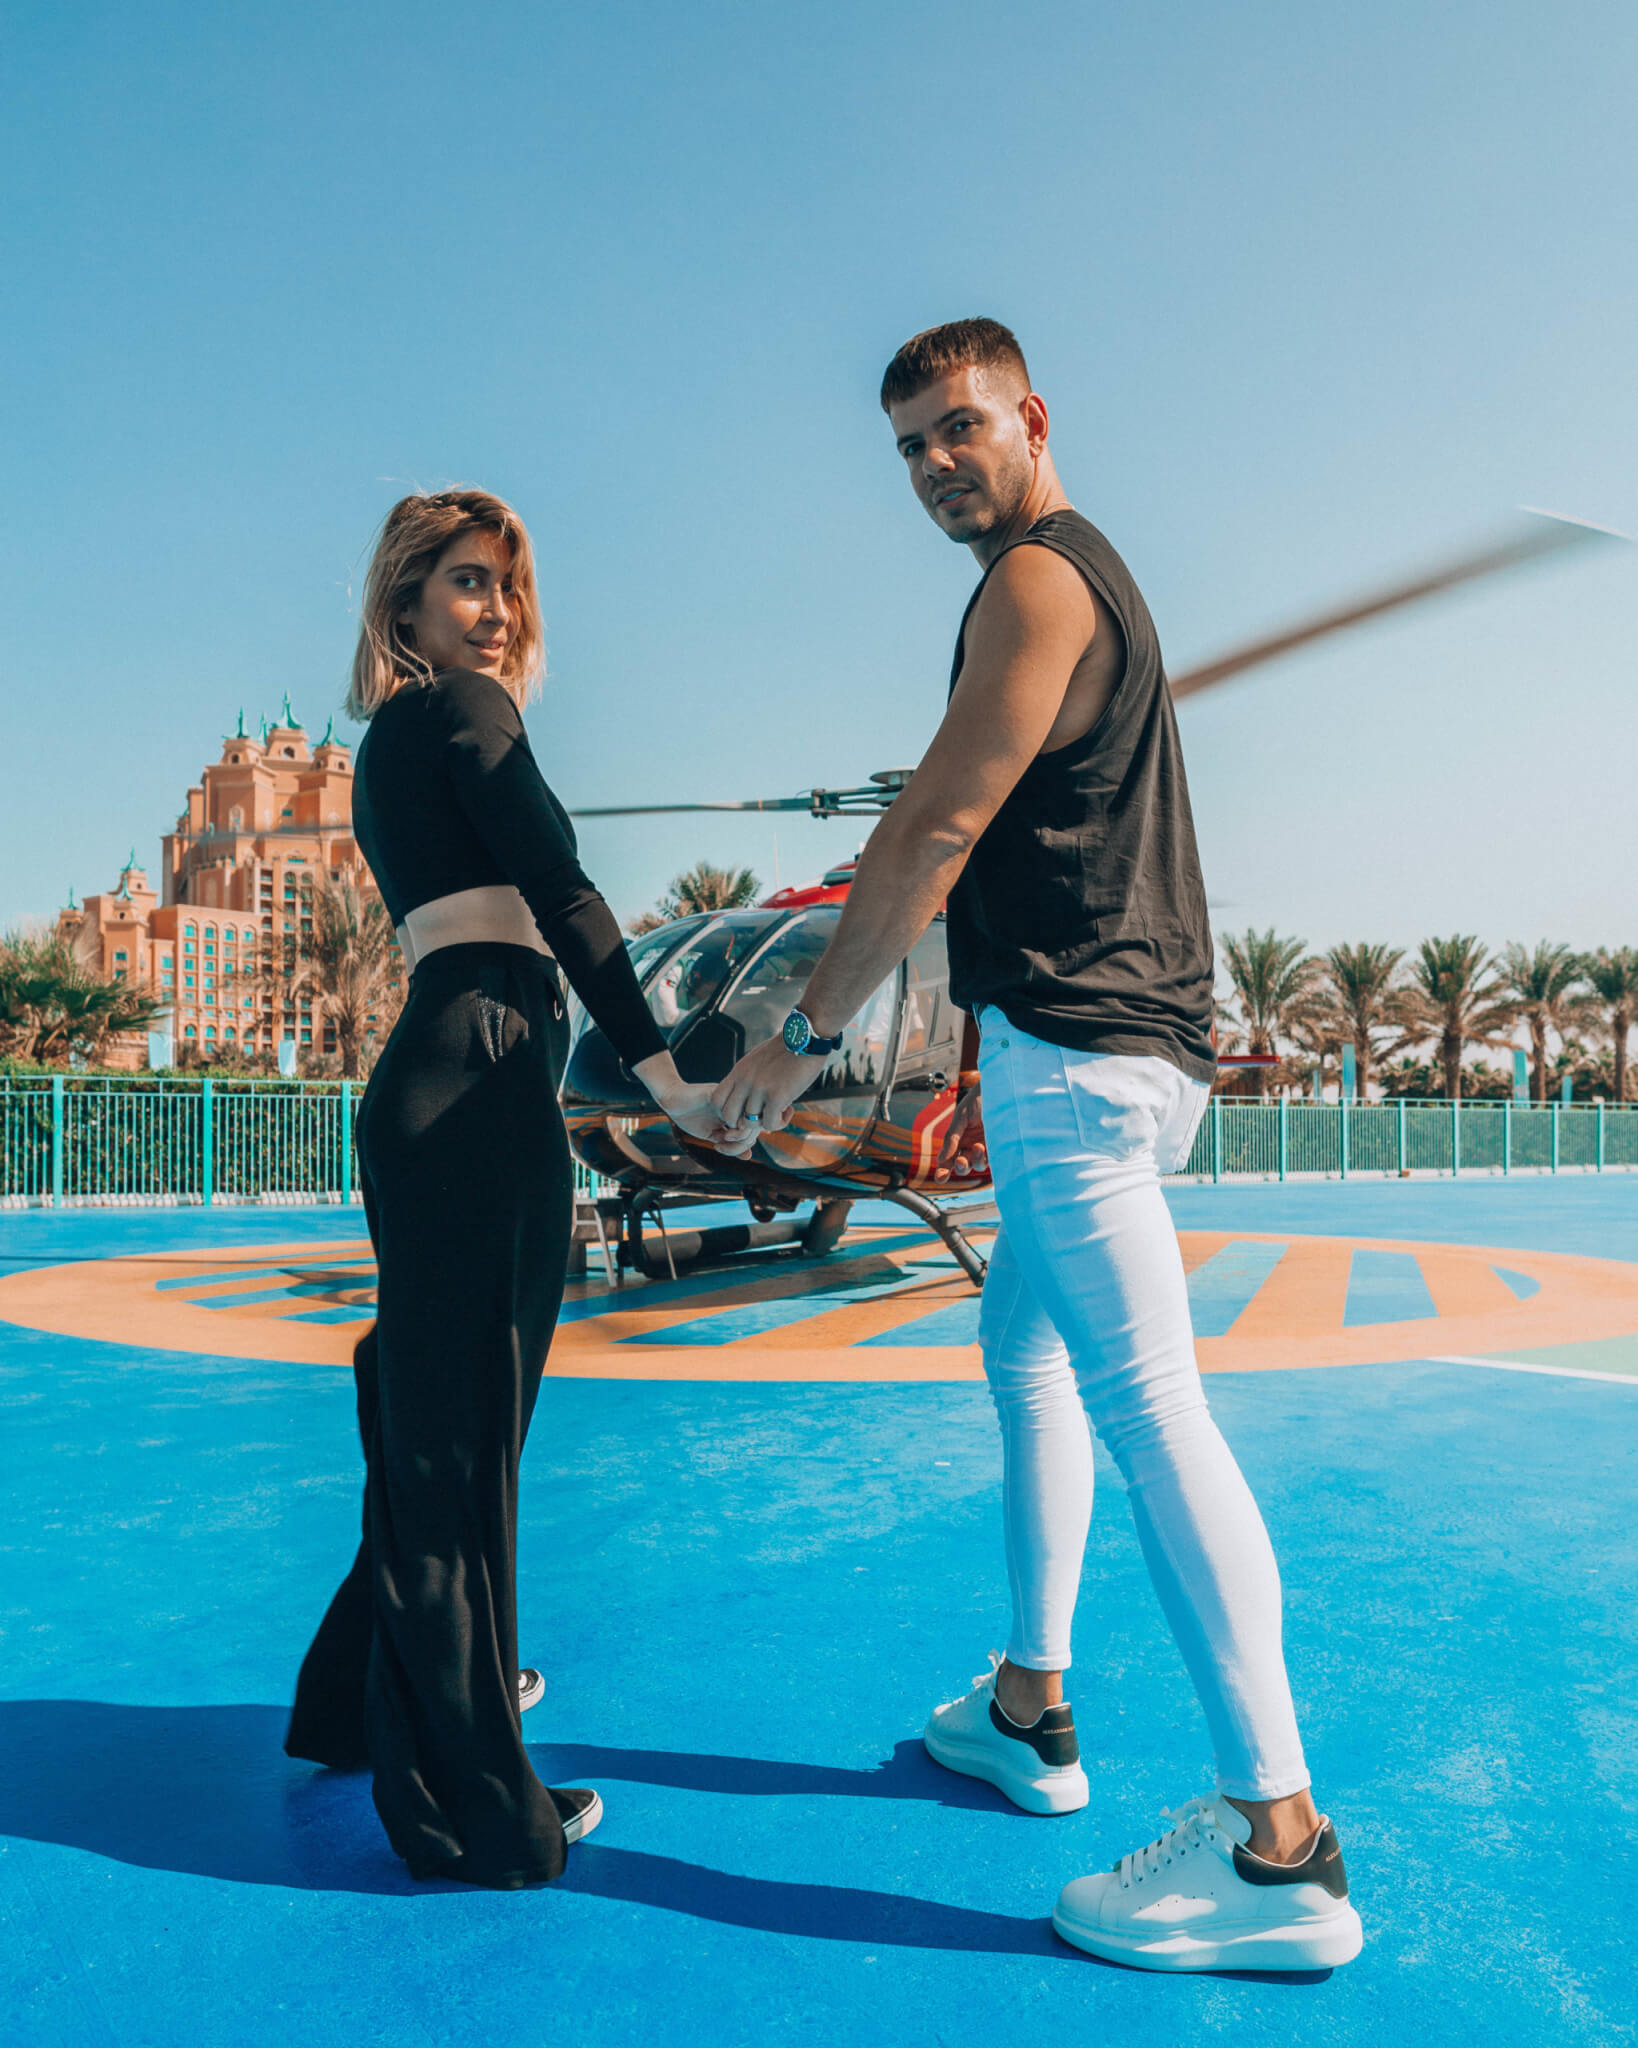 Helicopter-Ride-3-of-4-scaled 5 best things to do in Dubai 2020